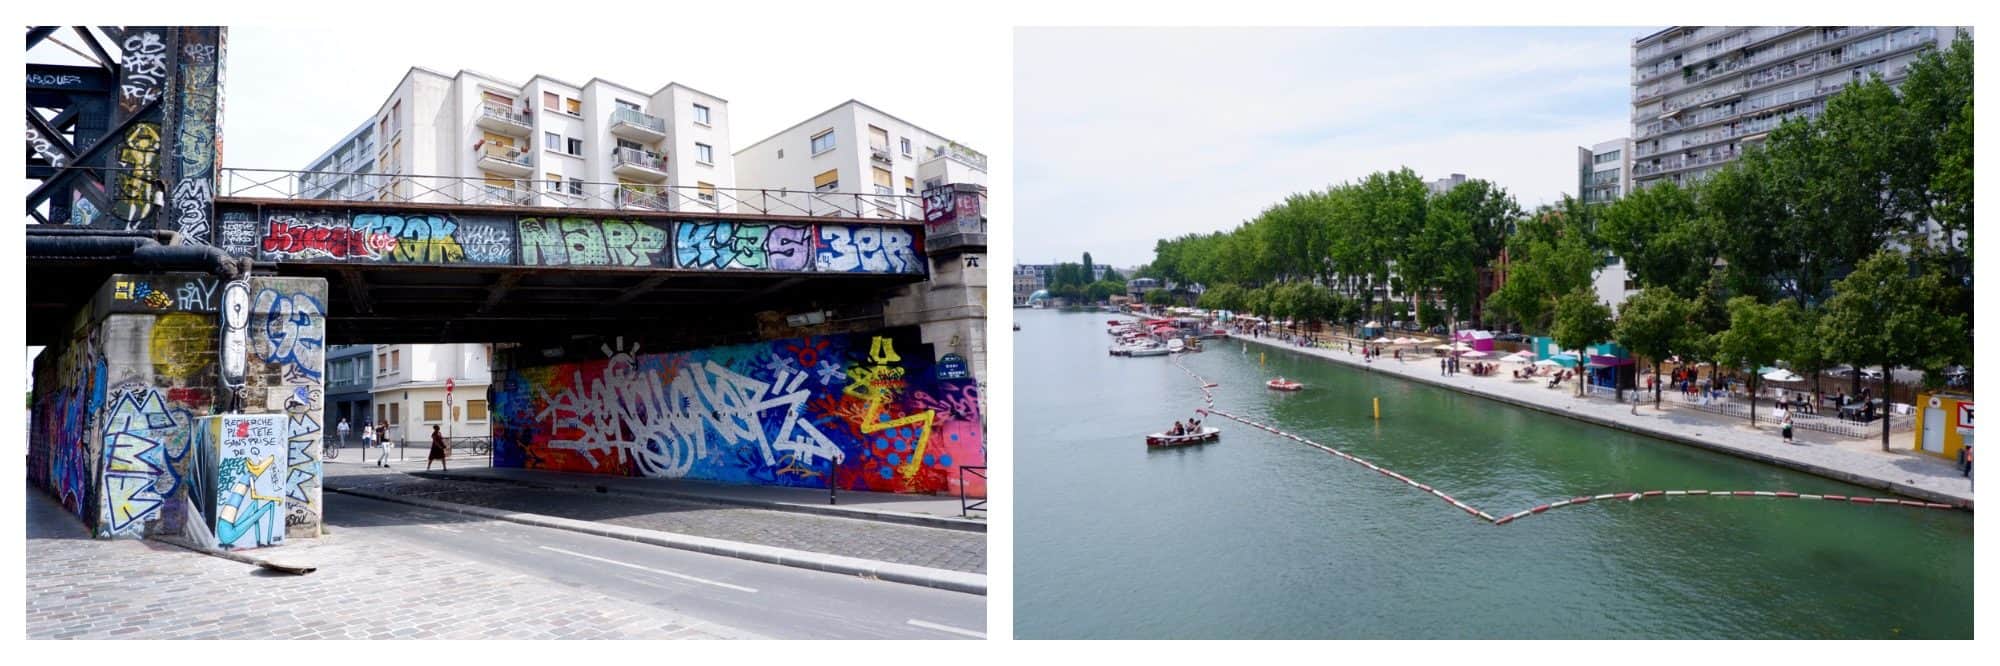 The colorful graffiti along the canals up in the 19th arrondissement of Paris along the canal (left) and the canal lined by a makeshift beach (right).